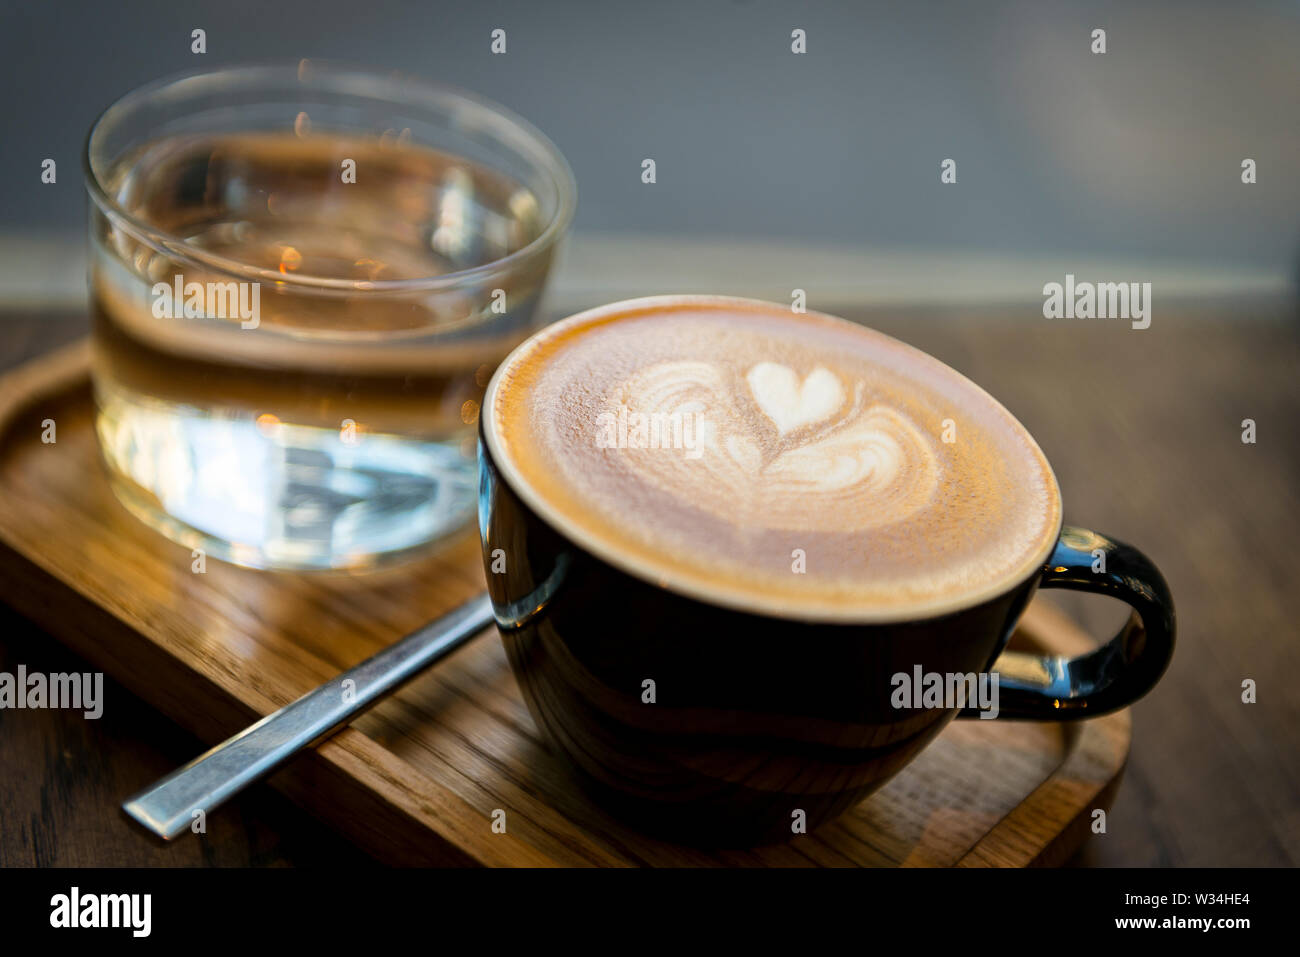 Well presented cup of coffee, complete with love heart in the milk foam and glass of water in a city of London coffee shop Stock Photo